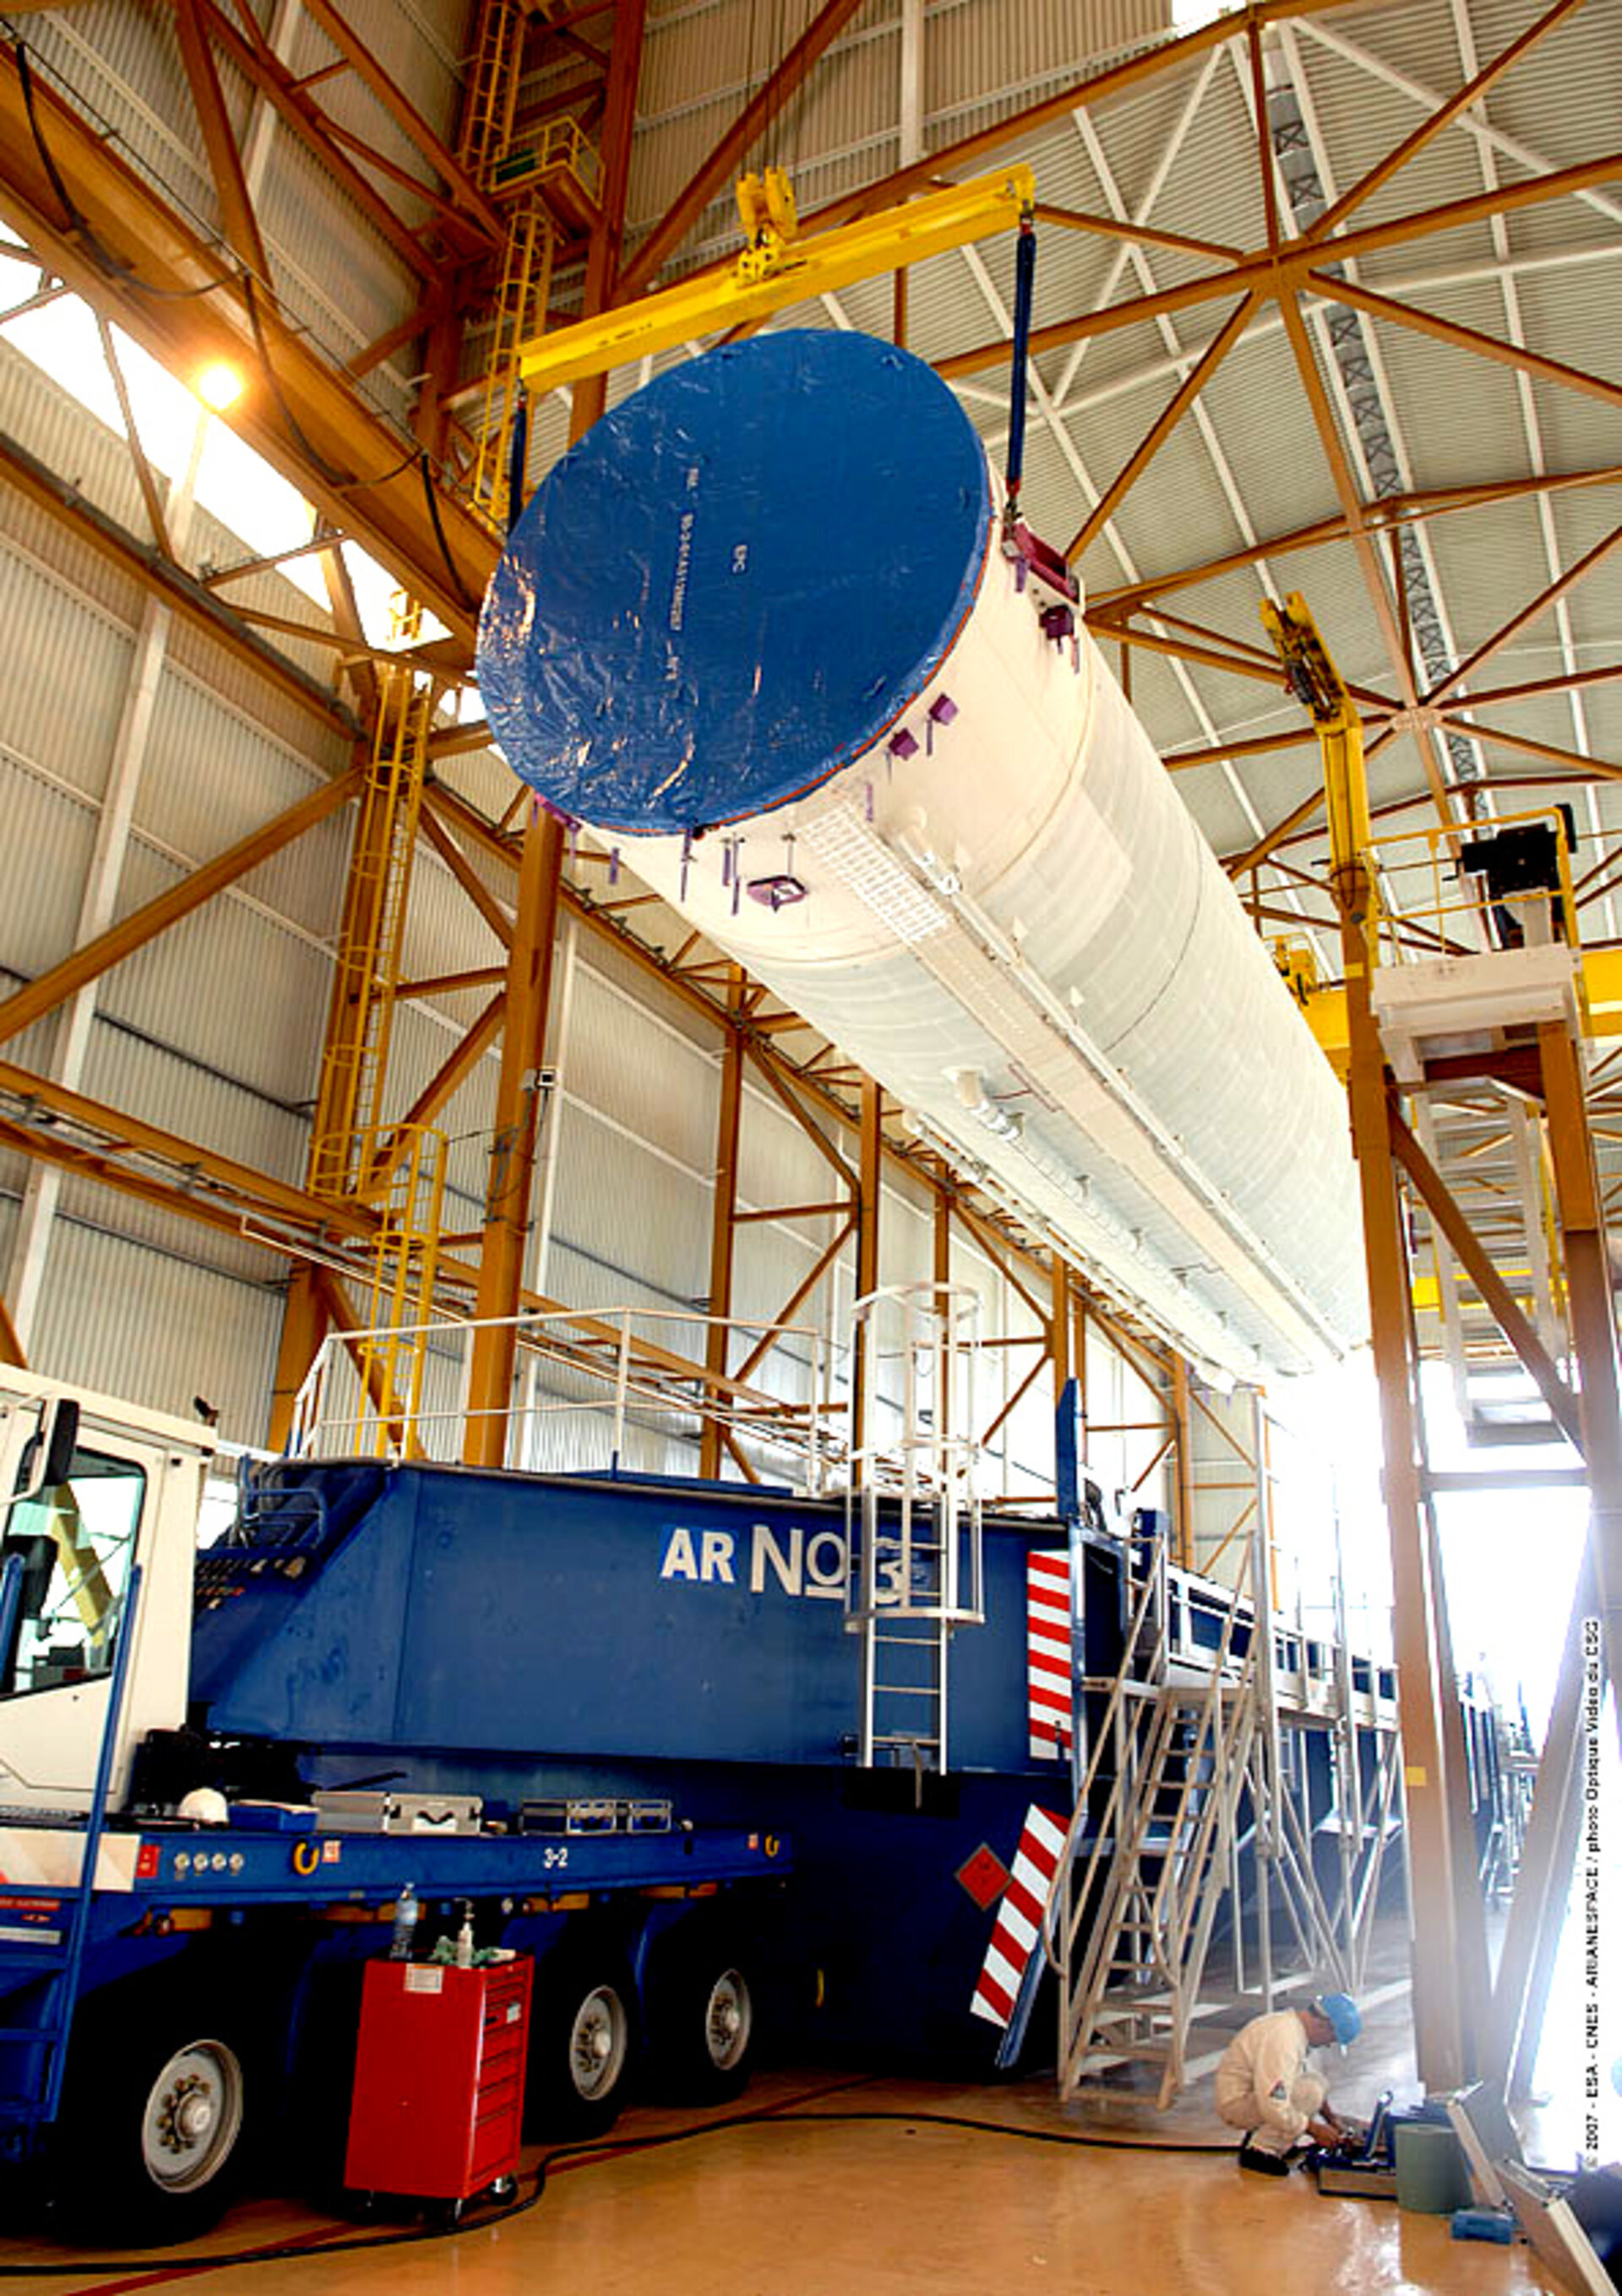 The main cryogenic stage for Jules Verne's Ariane 5 ES launch vehicle arrives in the Launcher Integration Building